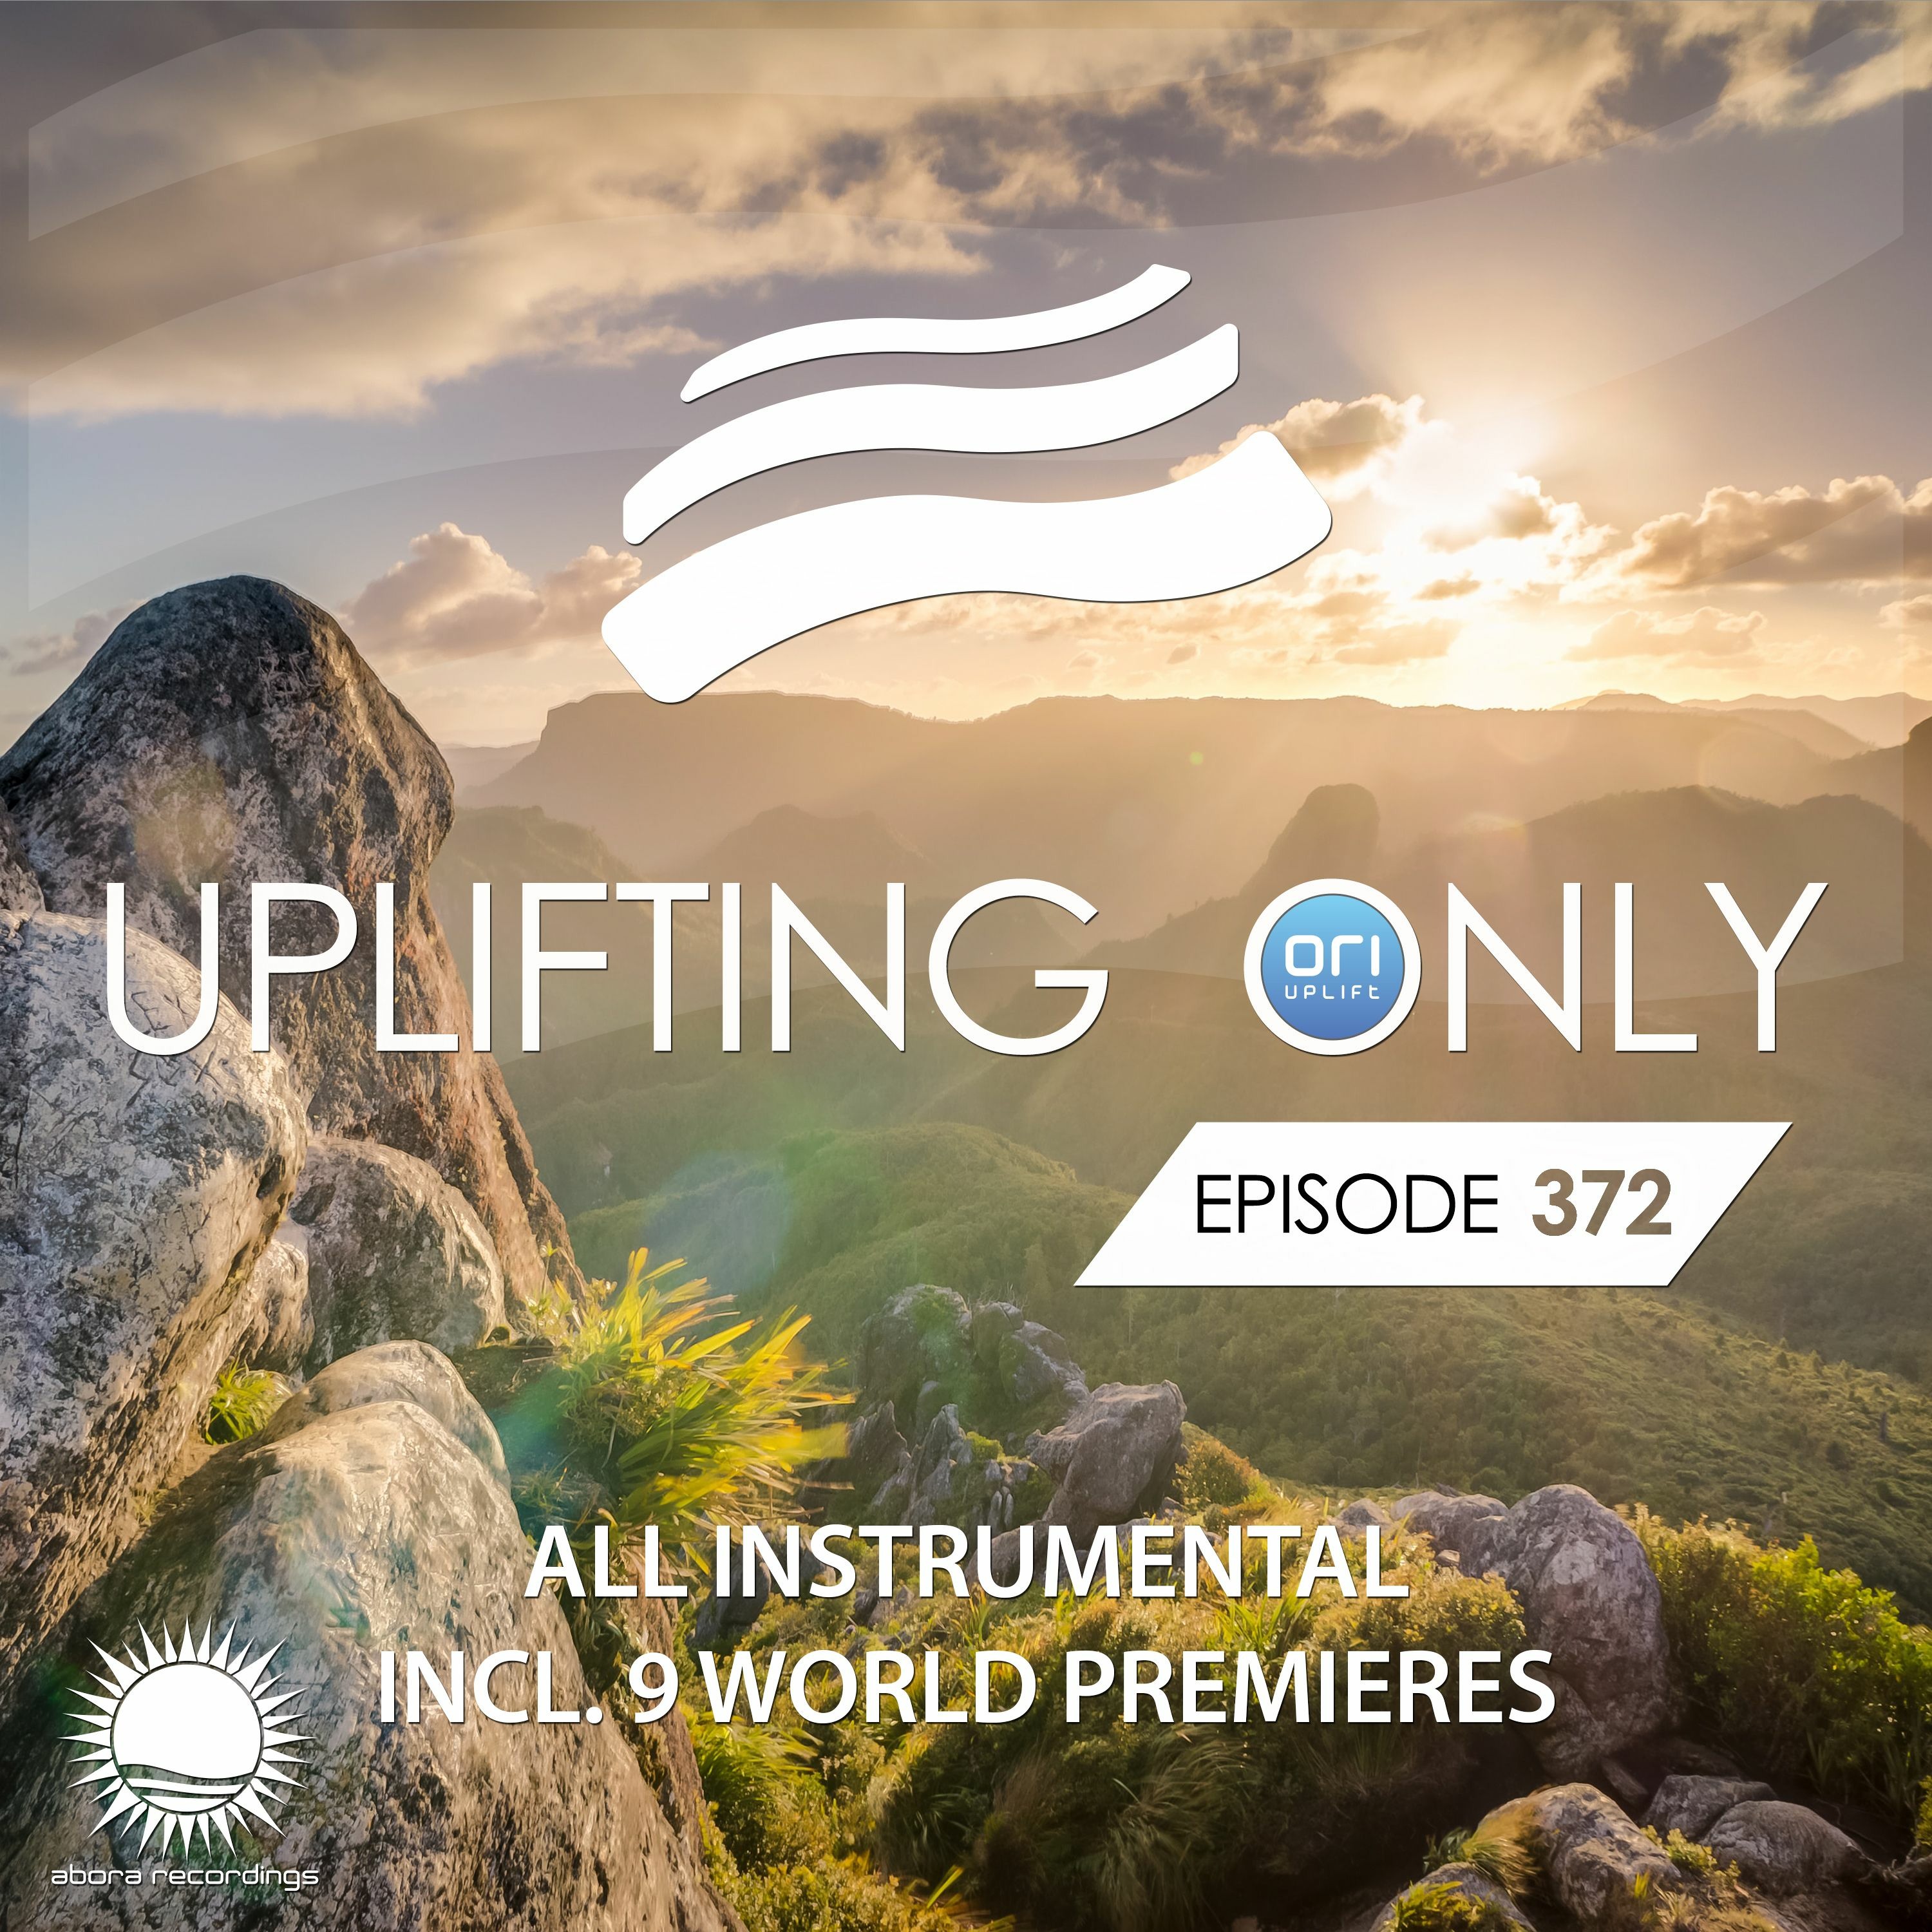 Uplifting Only 372 (March 26, 2020) [All Instrumental]